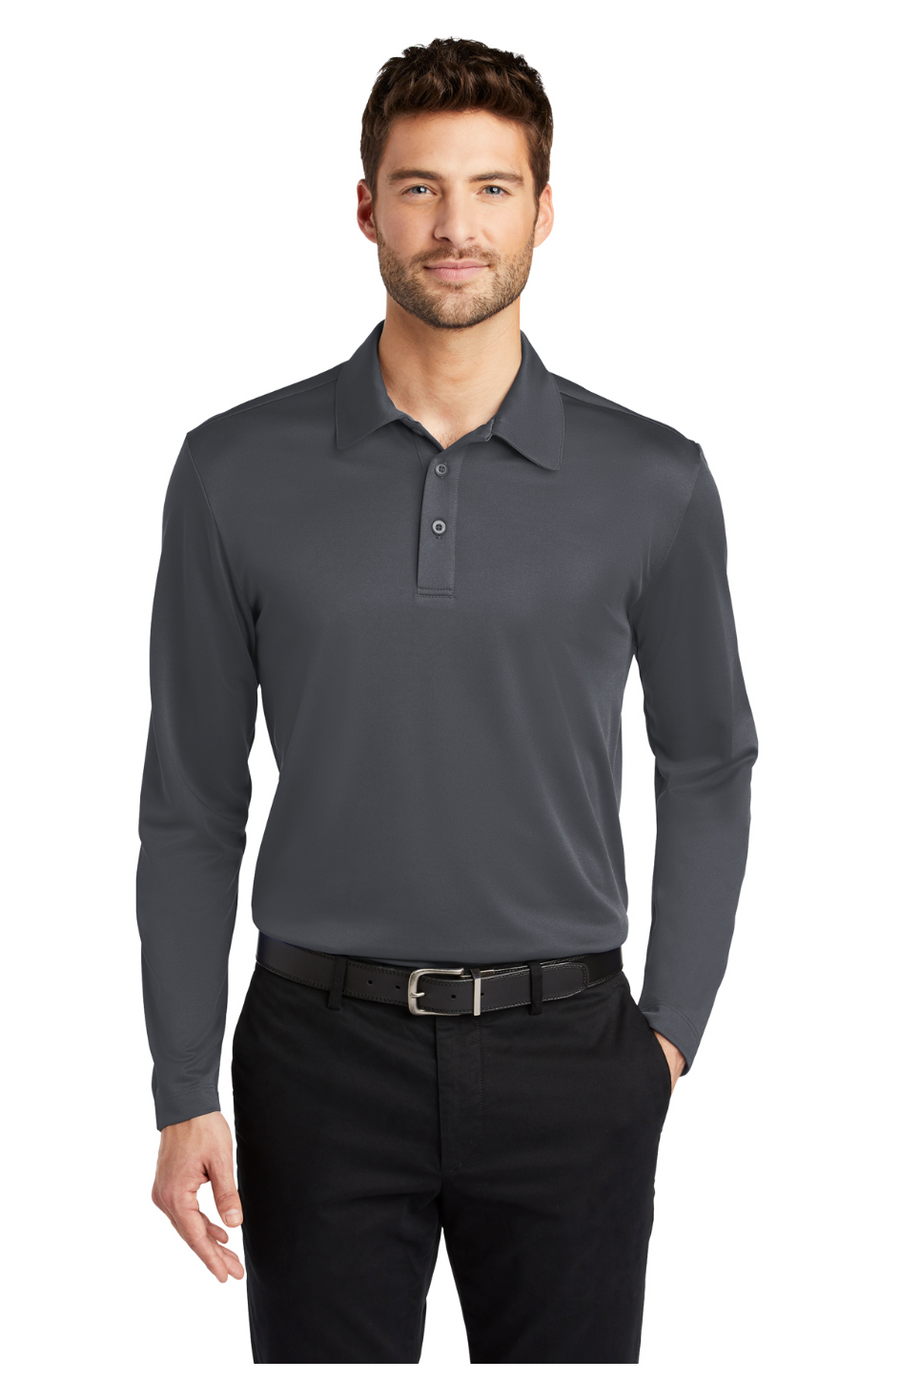 Authority Port Authority Silk Touch Long Sleeve Mens Polo (Preorder)